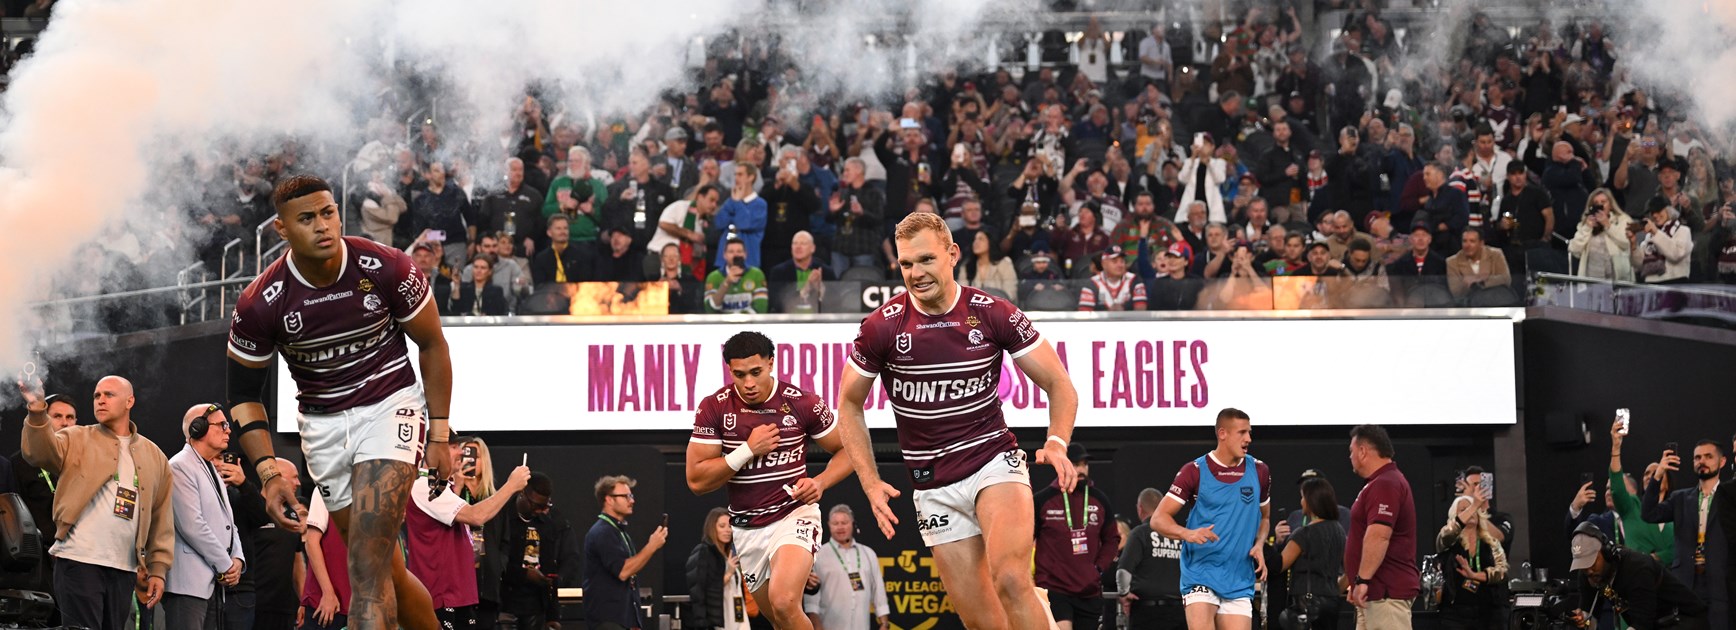 PointsBet Match Preview vs Roosters